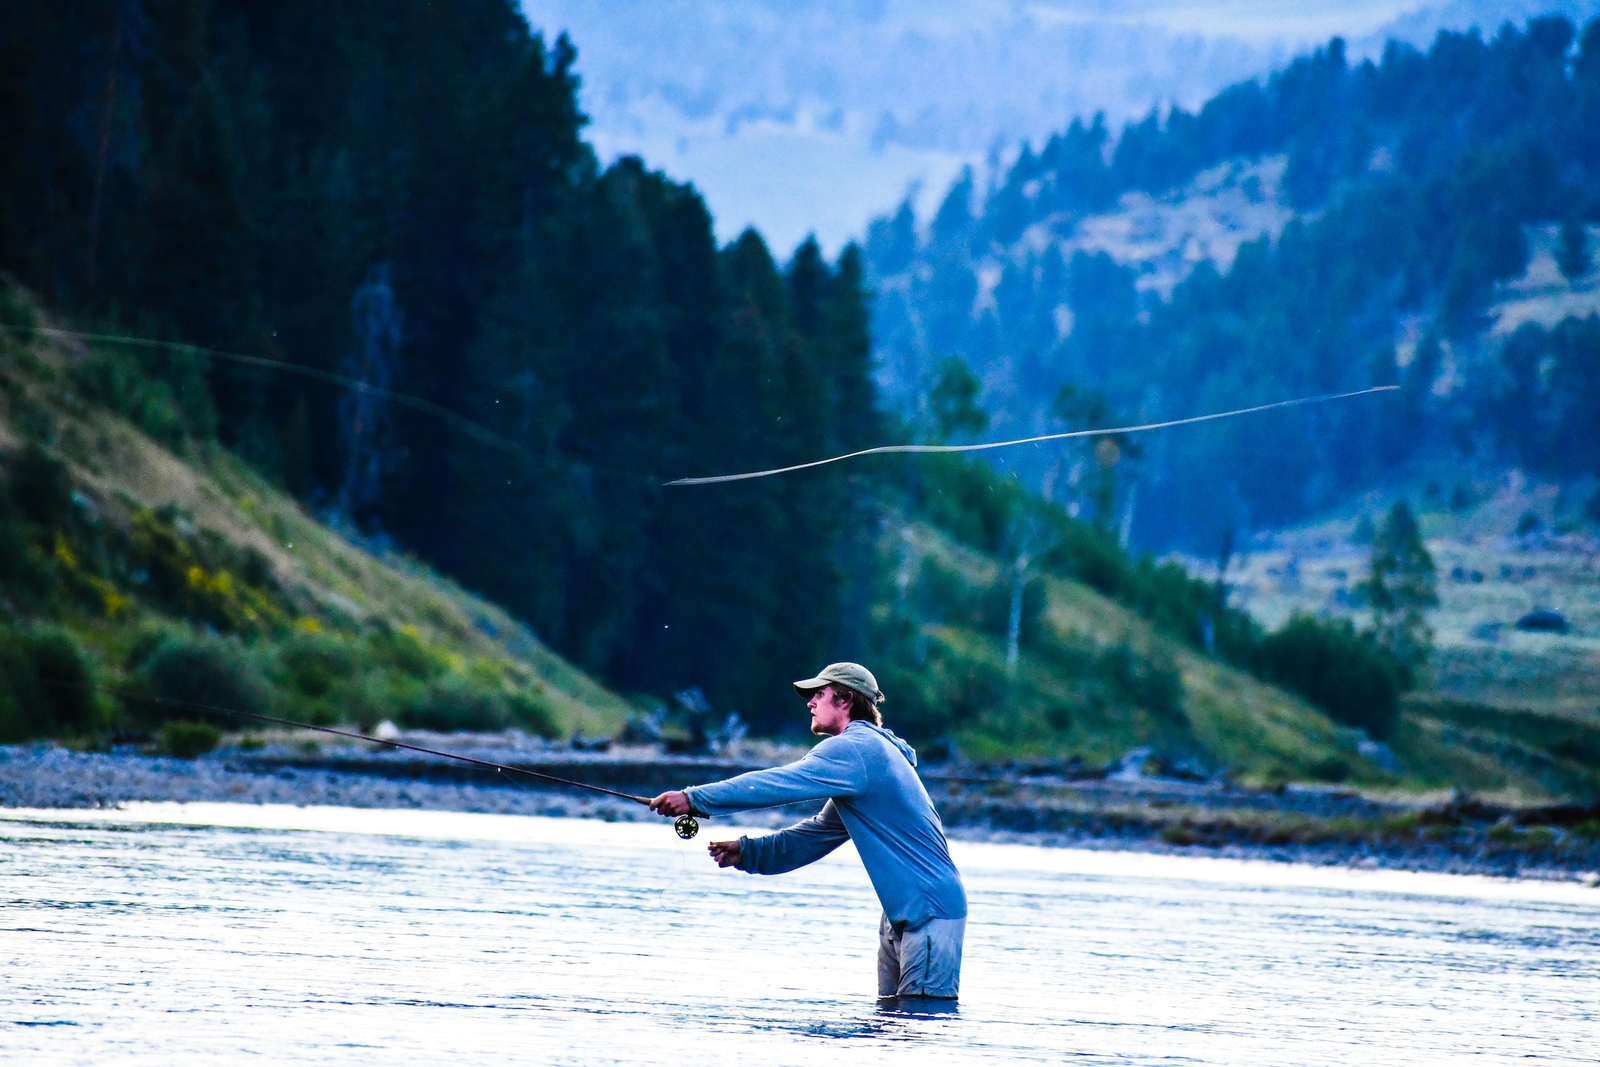 Fly Fisherman Casting